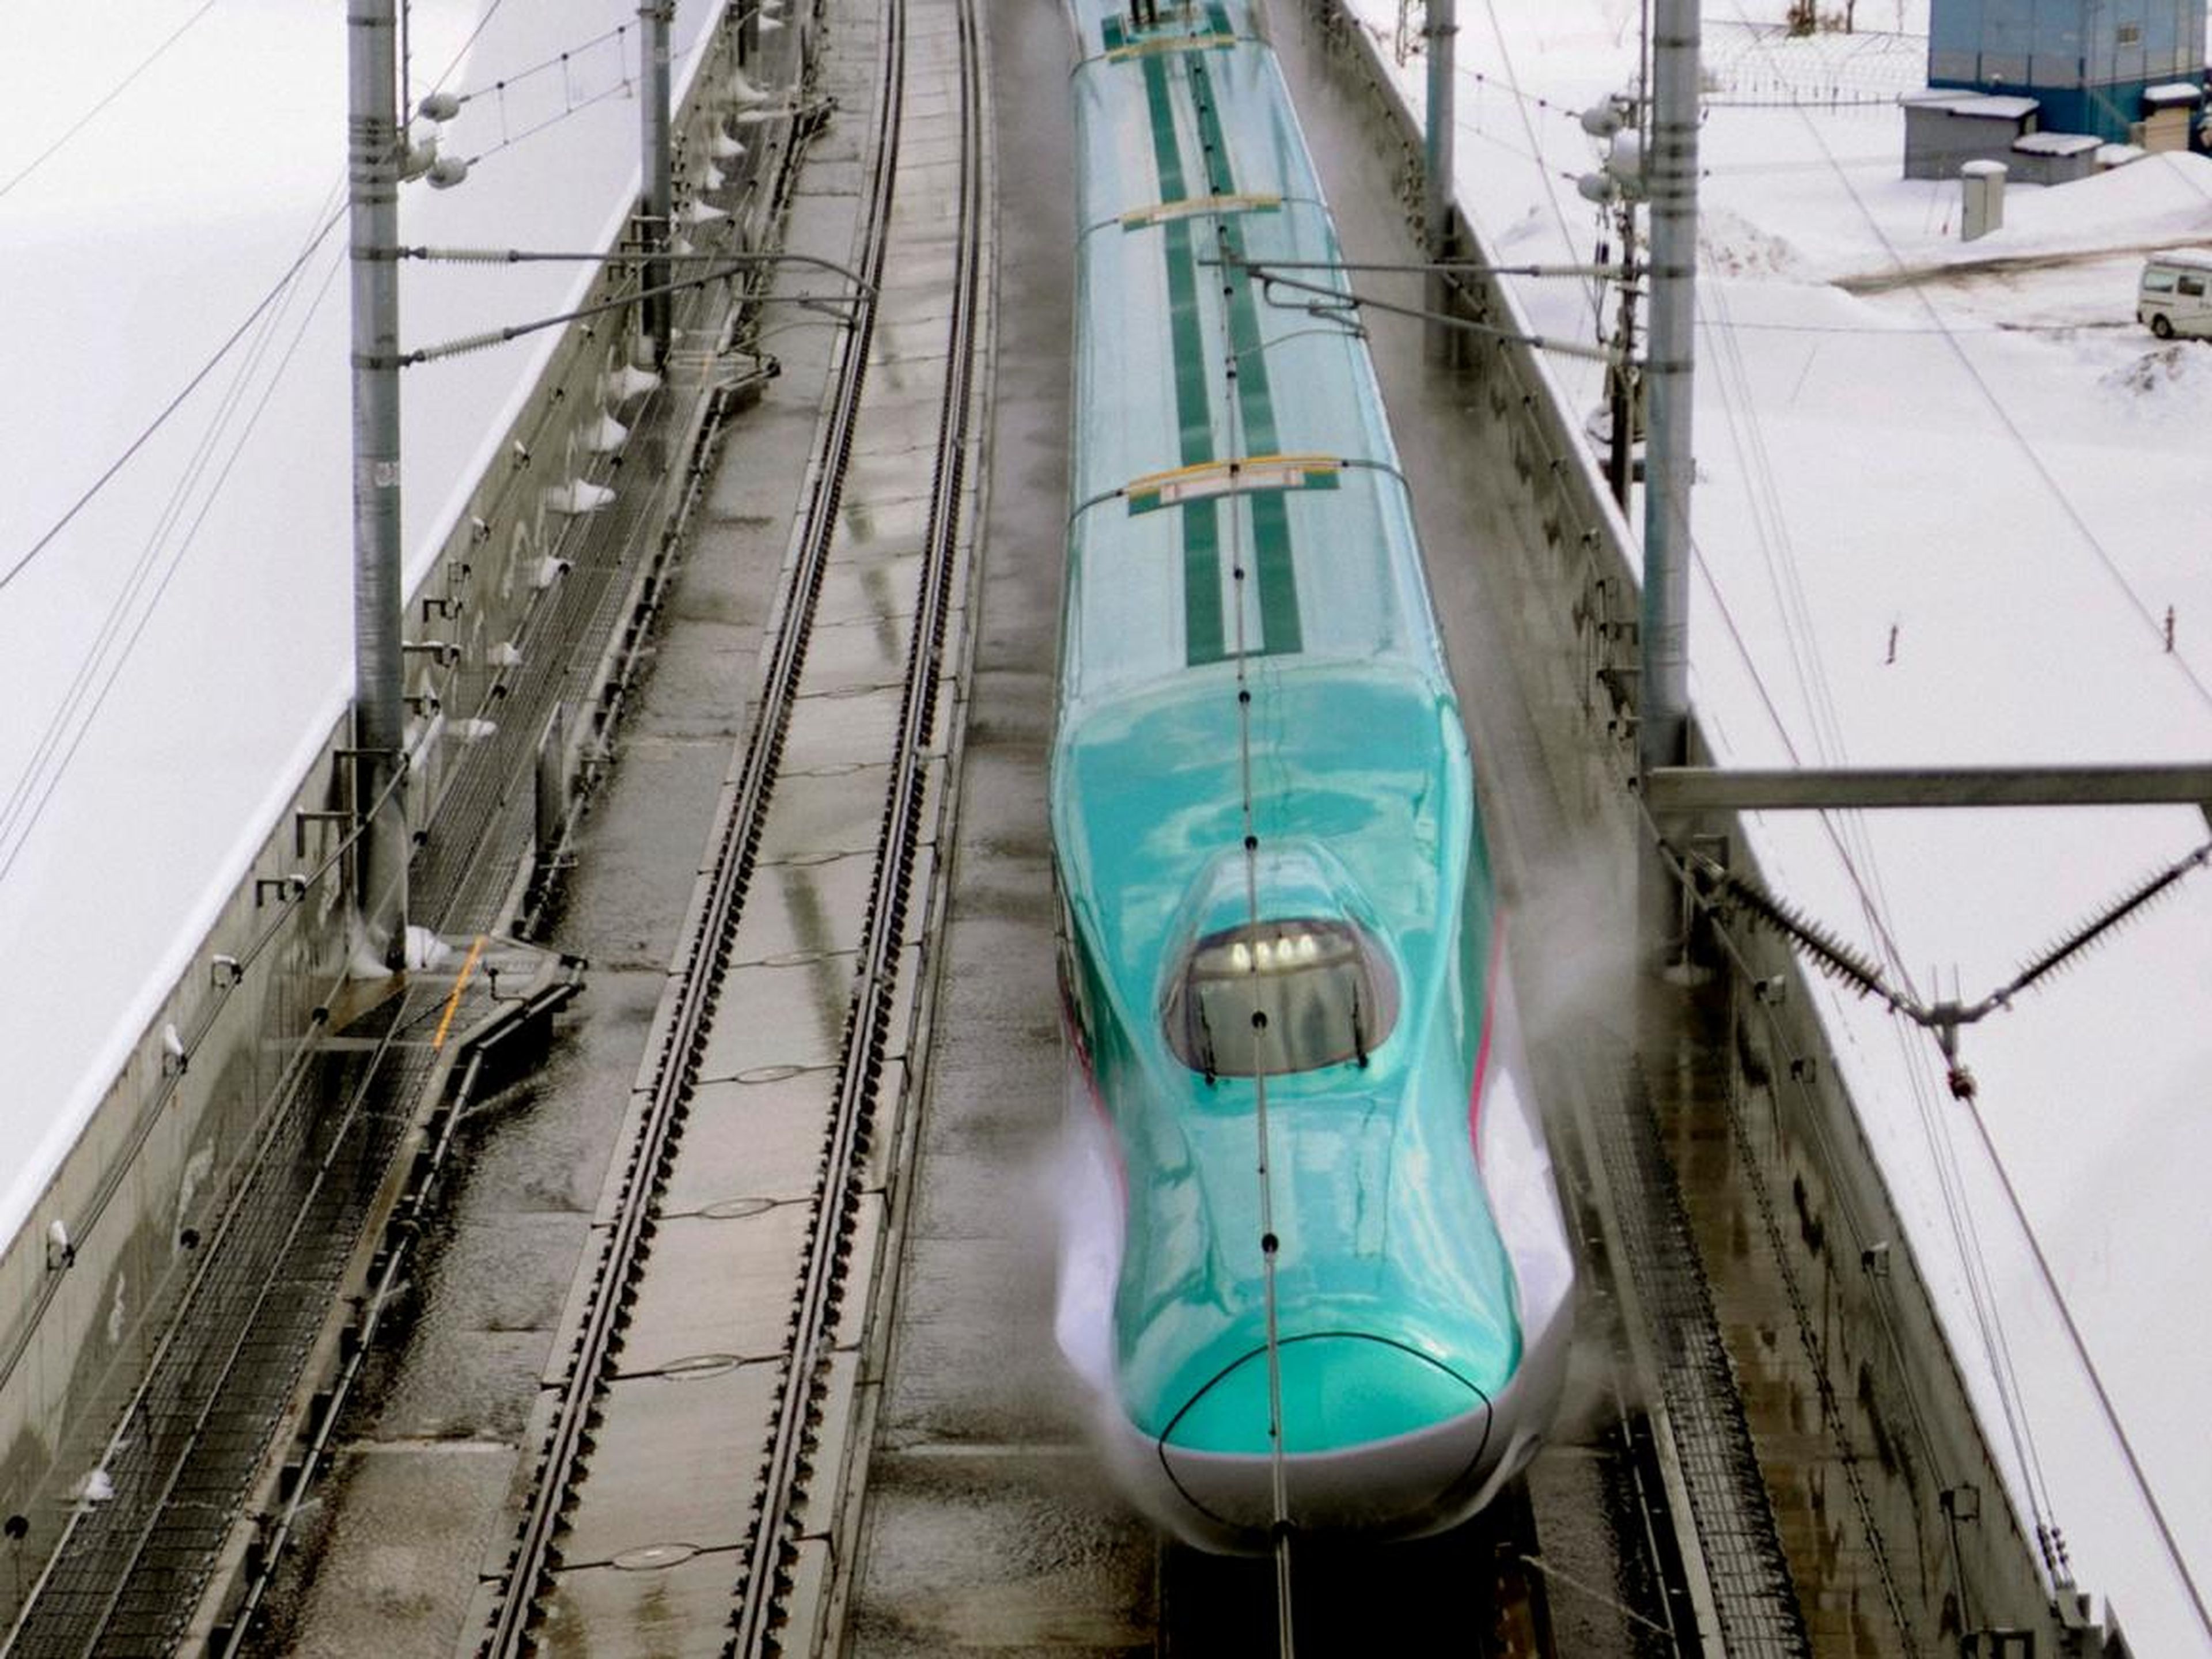 A sprinkler system using warm water keeps the Tokyo-to-Aomori Shinkansen – a high-speed train run by the East Japan Railway Company — on its tracks and the snow and ice at bay. The company told INSIDER it pumps water from local